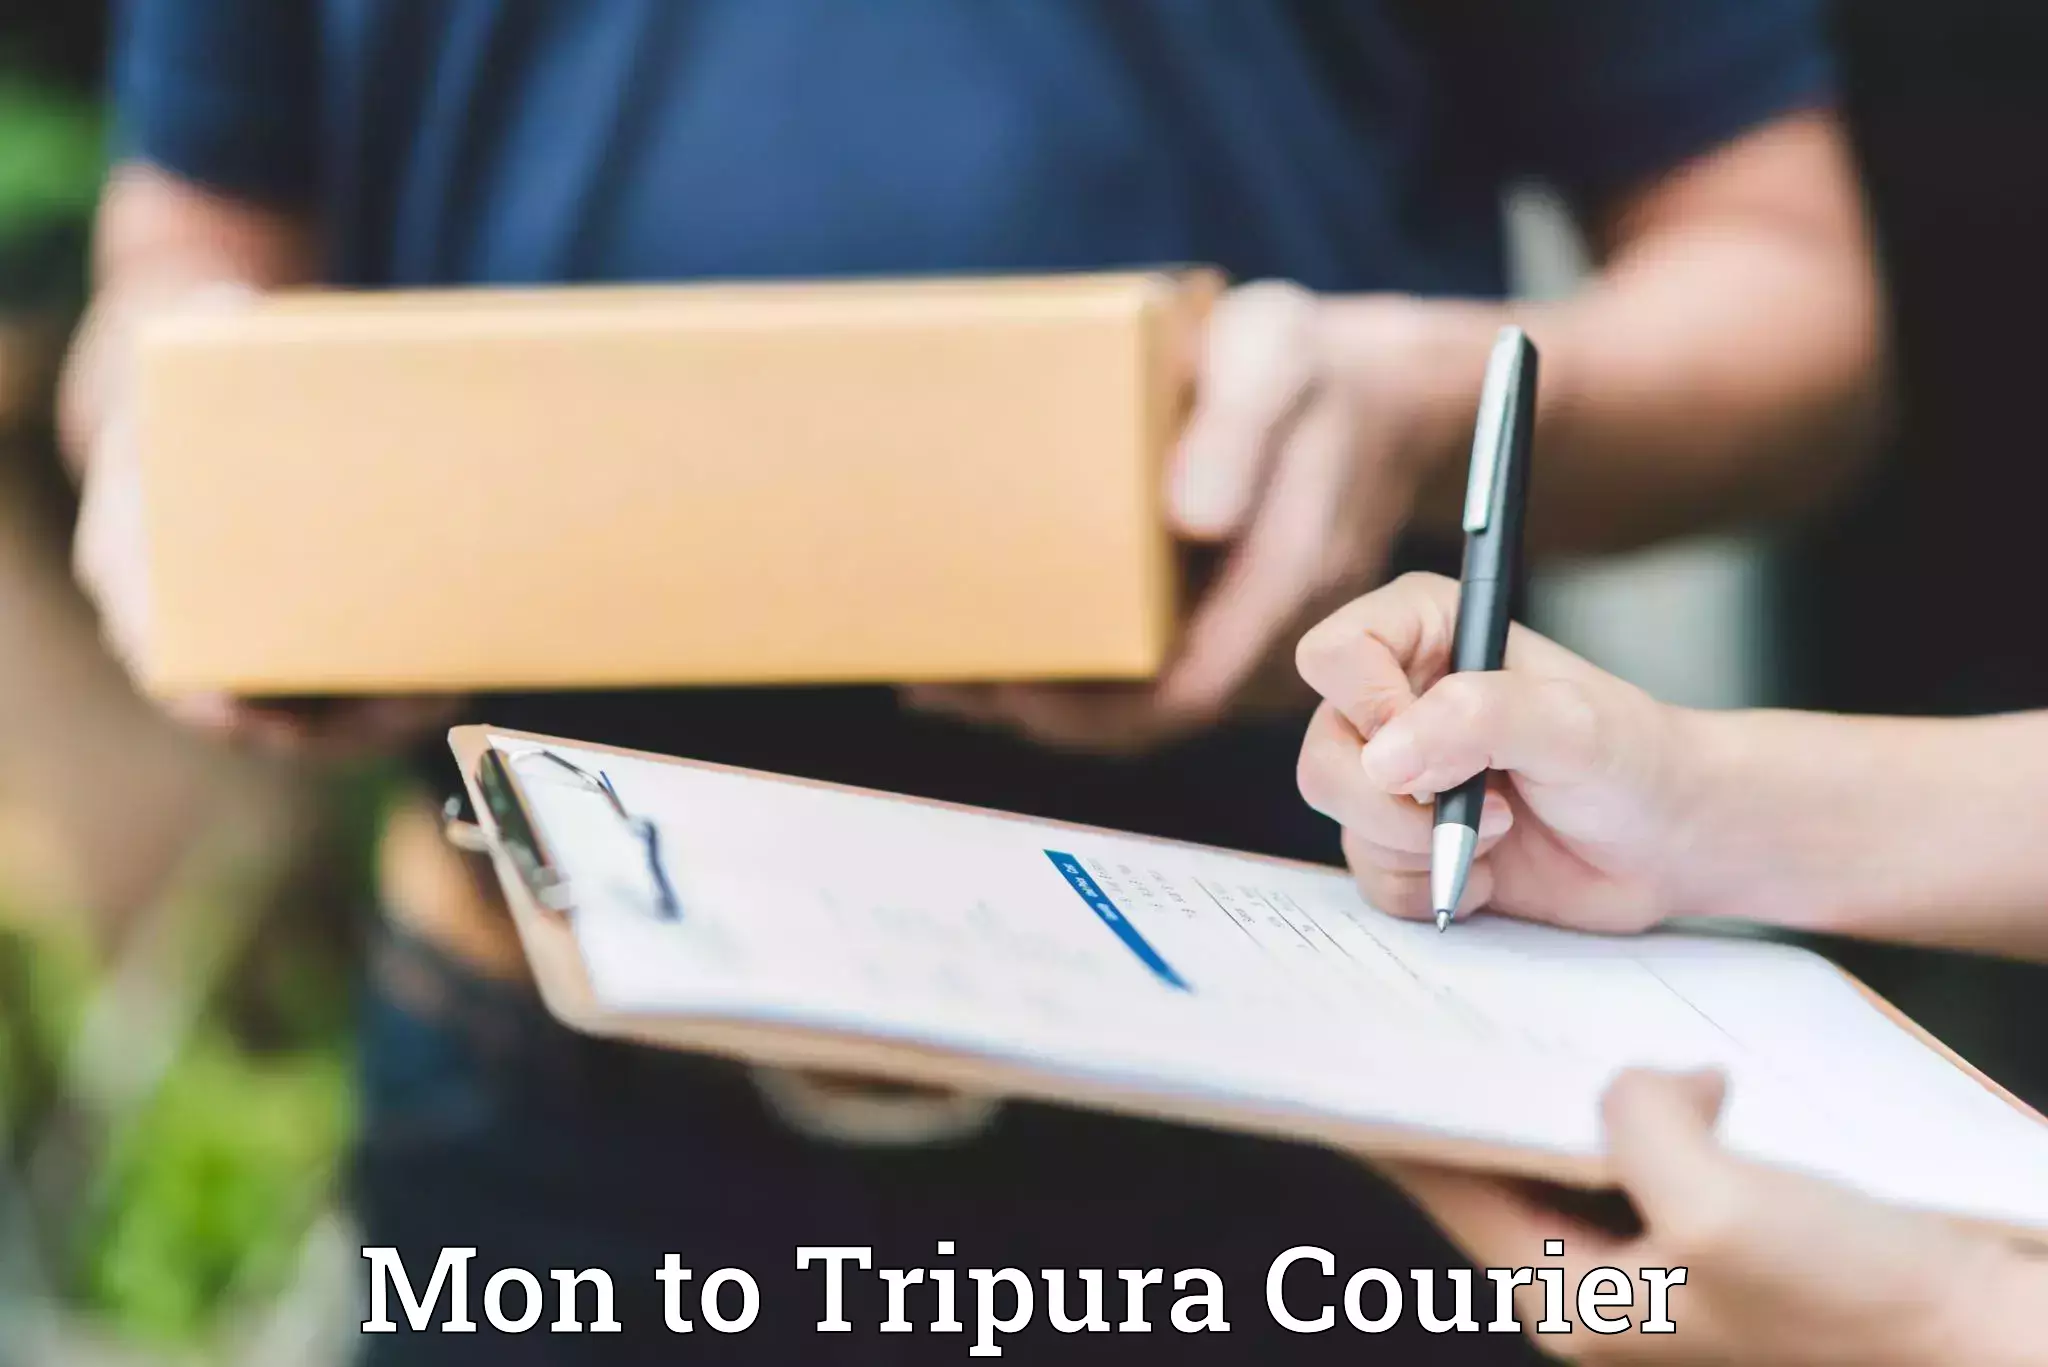 Furniture moving assistance Mon to Tripura